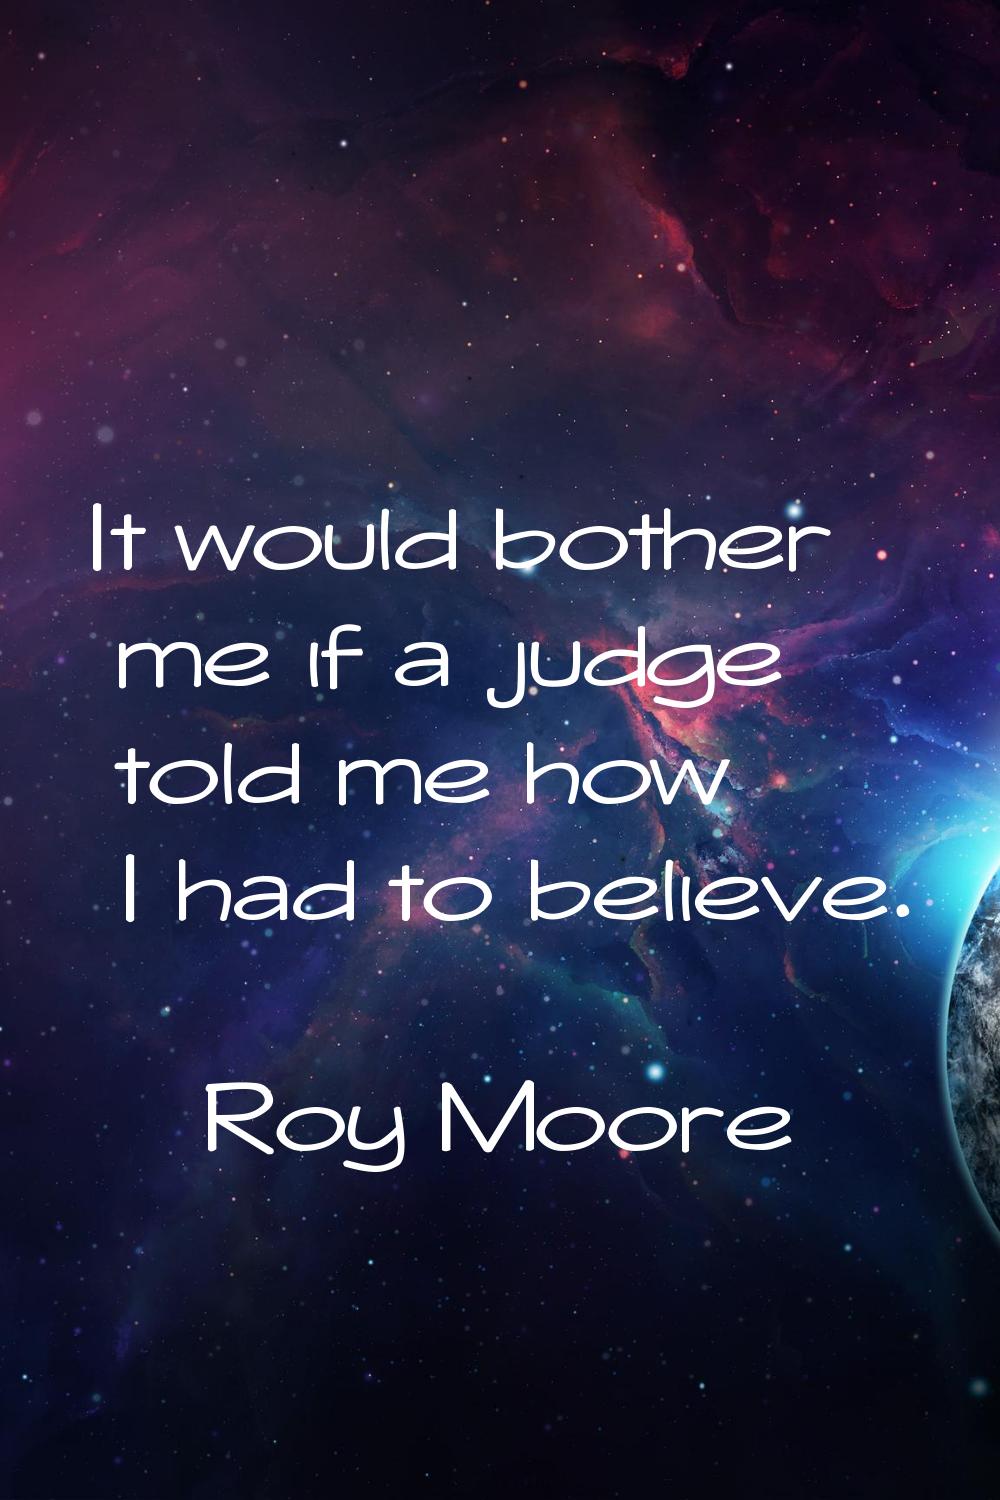 It would bother me if a judge told me how I had to believe.